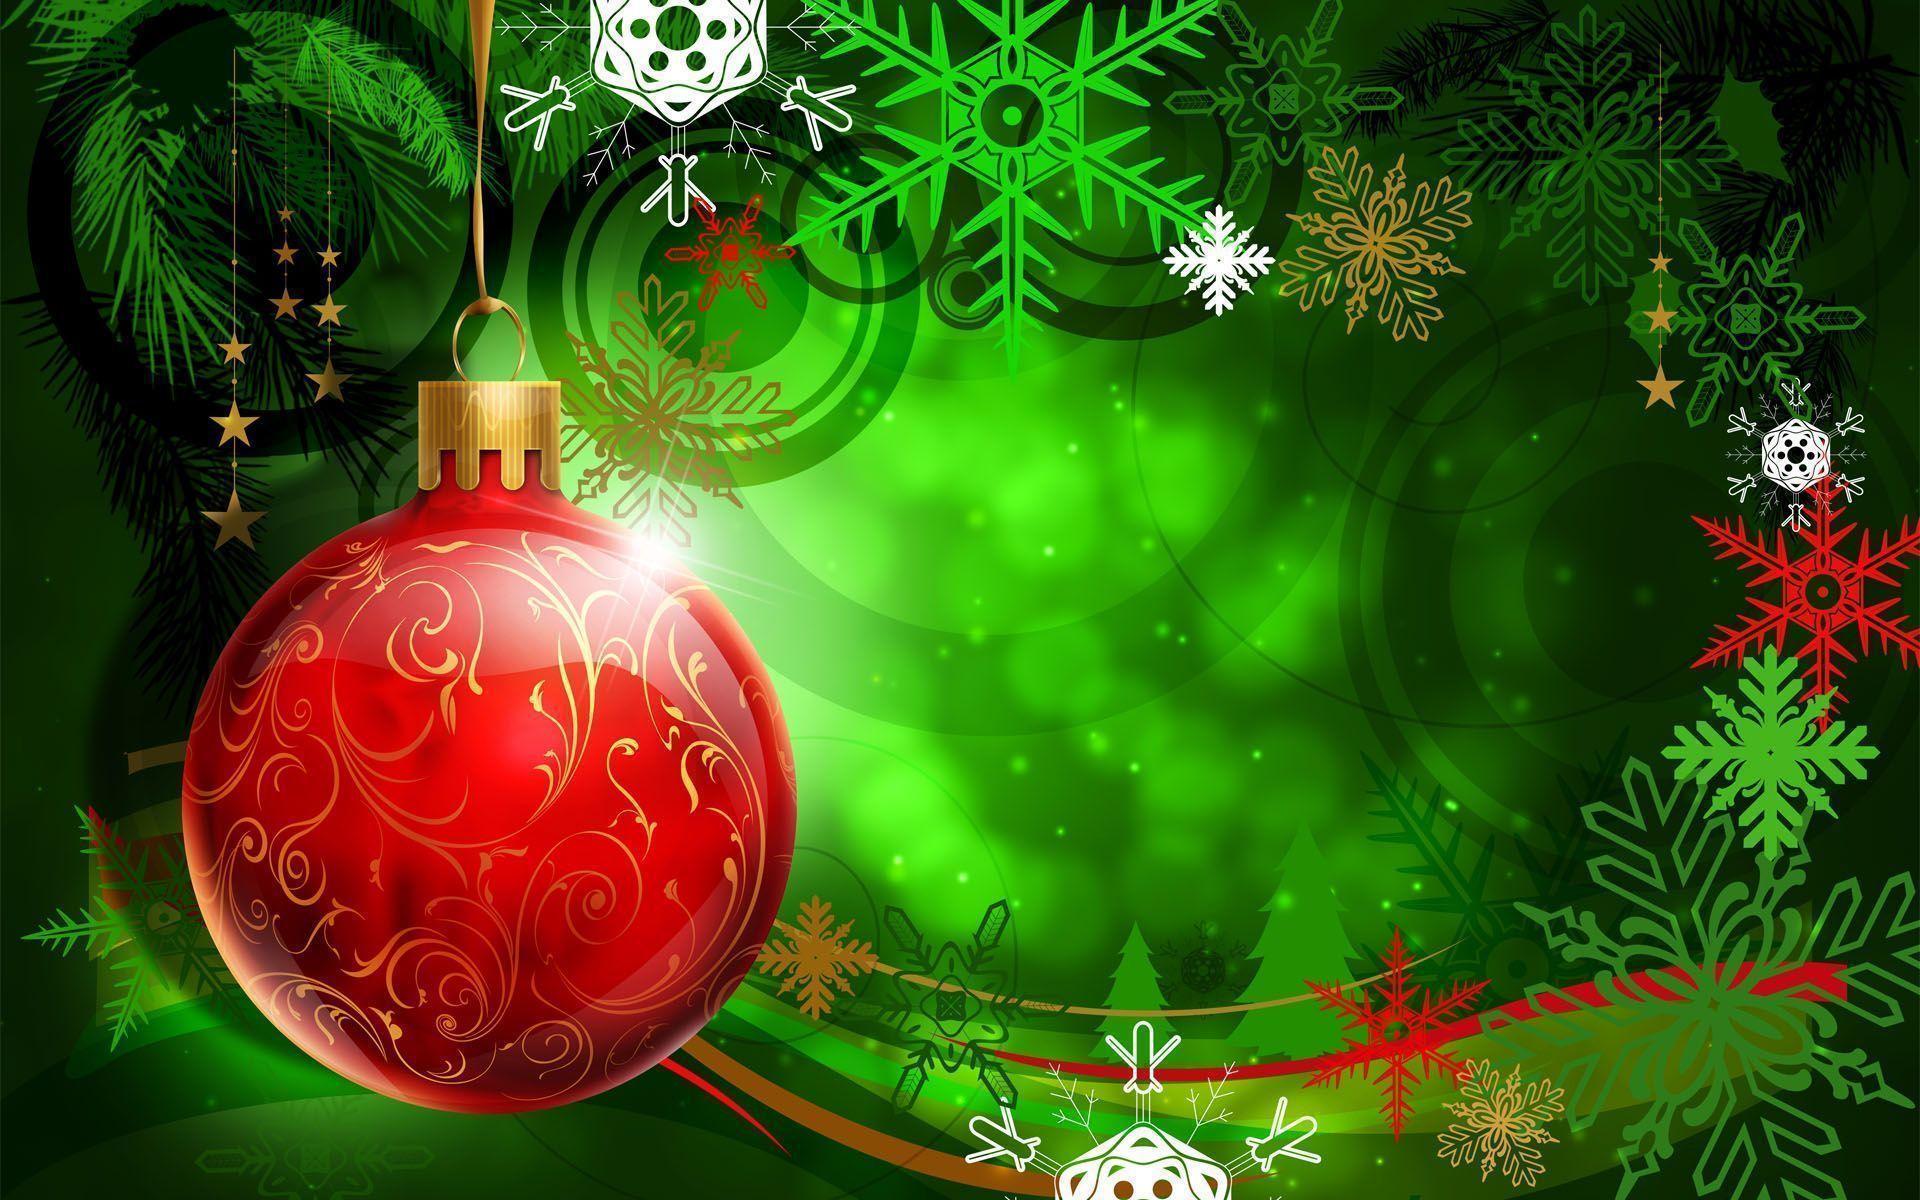 Hd Colorful Christmas Decoration Screensaver Backgrounds ... taken